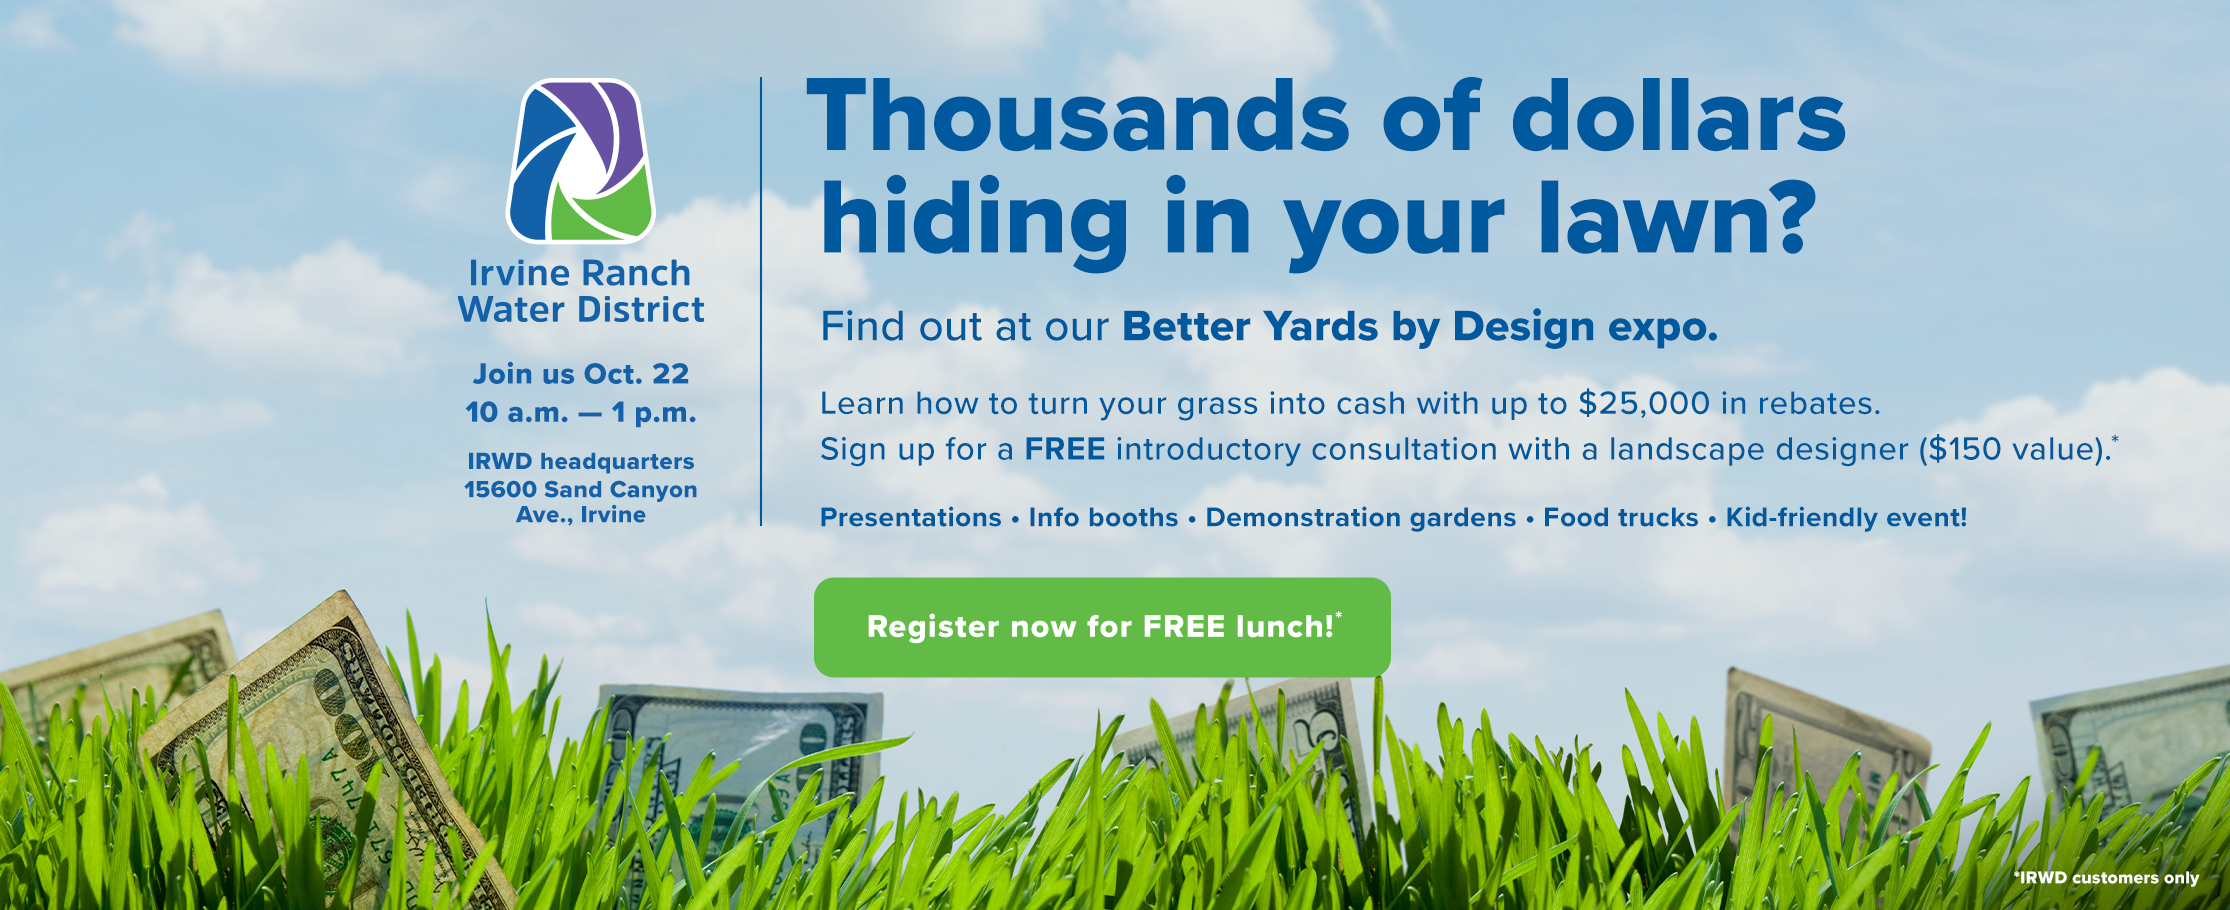 Better Yards by Design expo